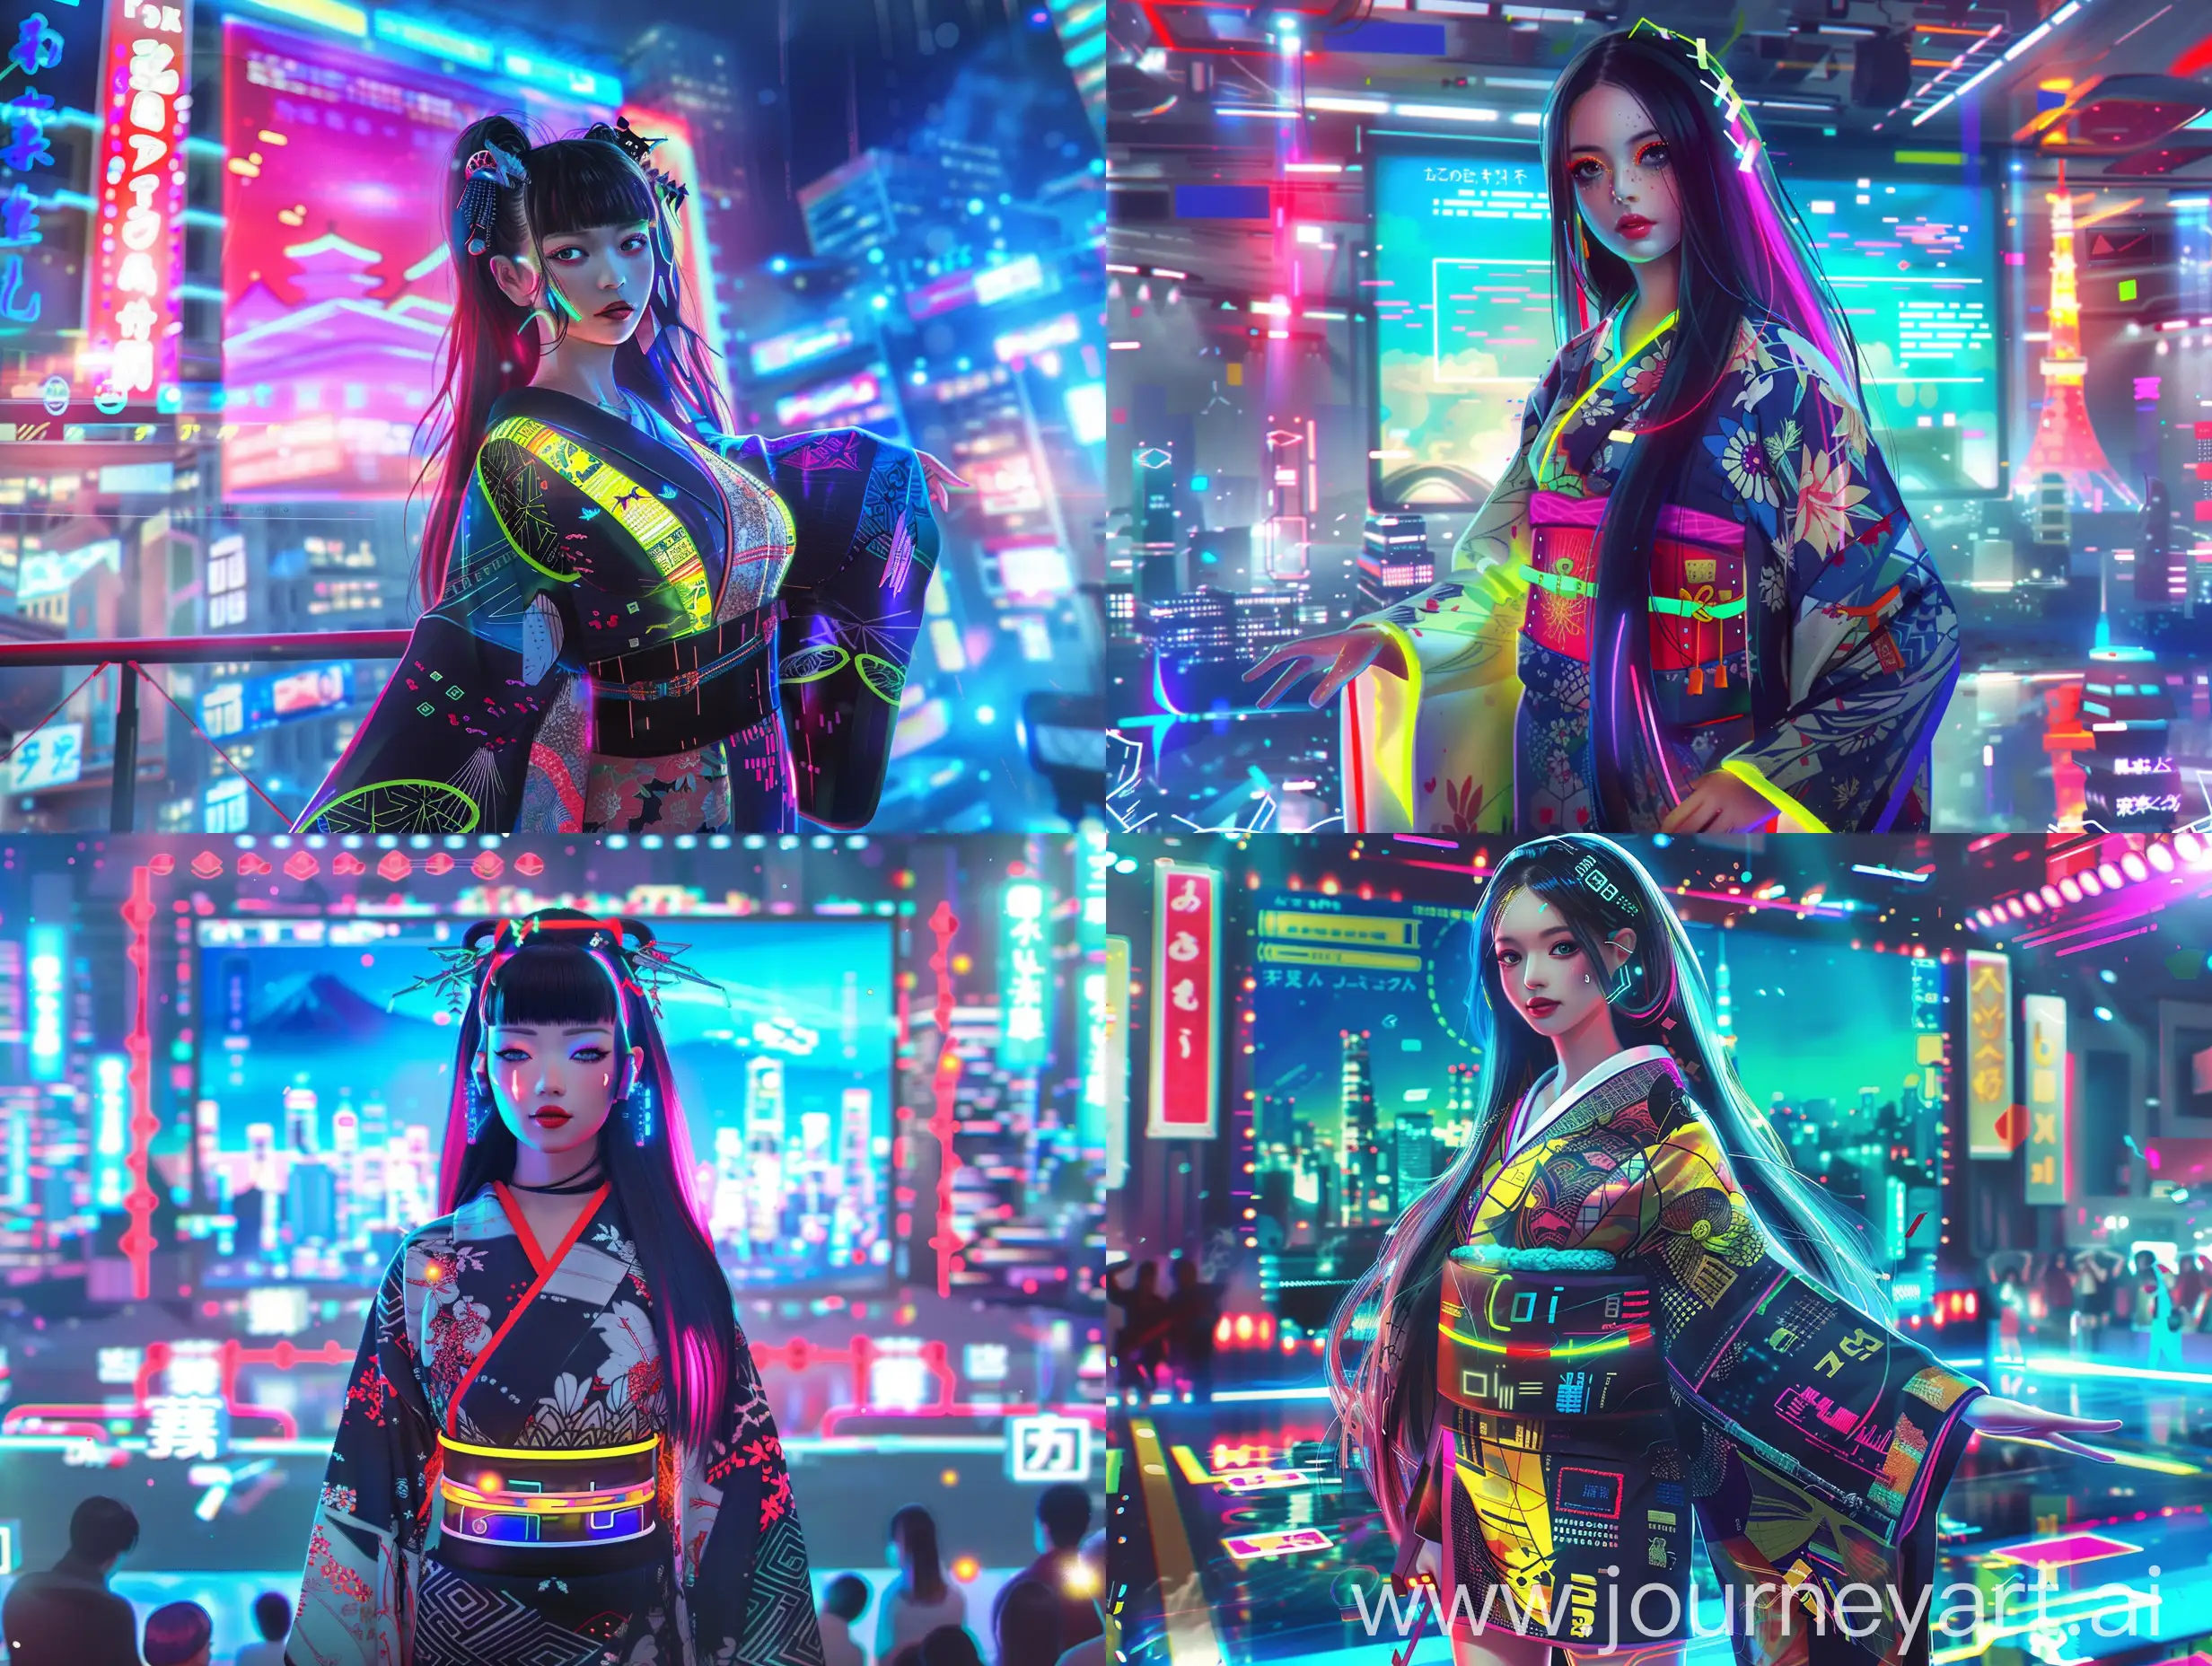 Futuristic-Japanese-Idol-on-Stage-with-Holographic-Backdrop